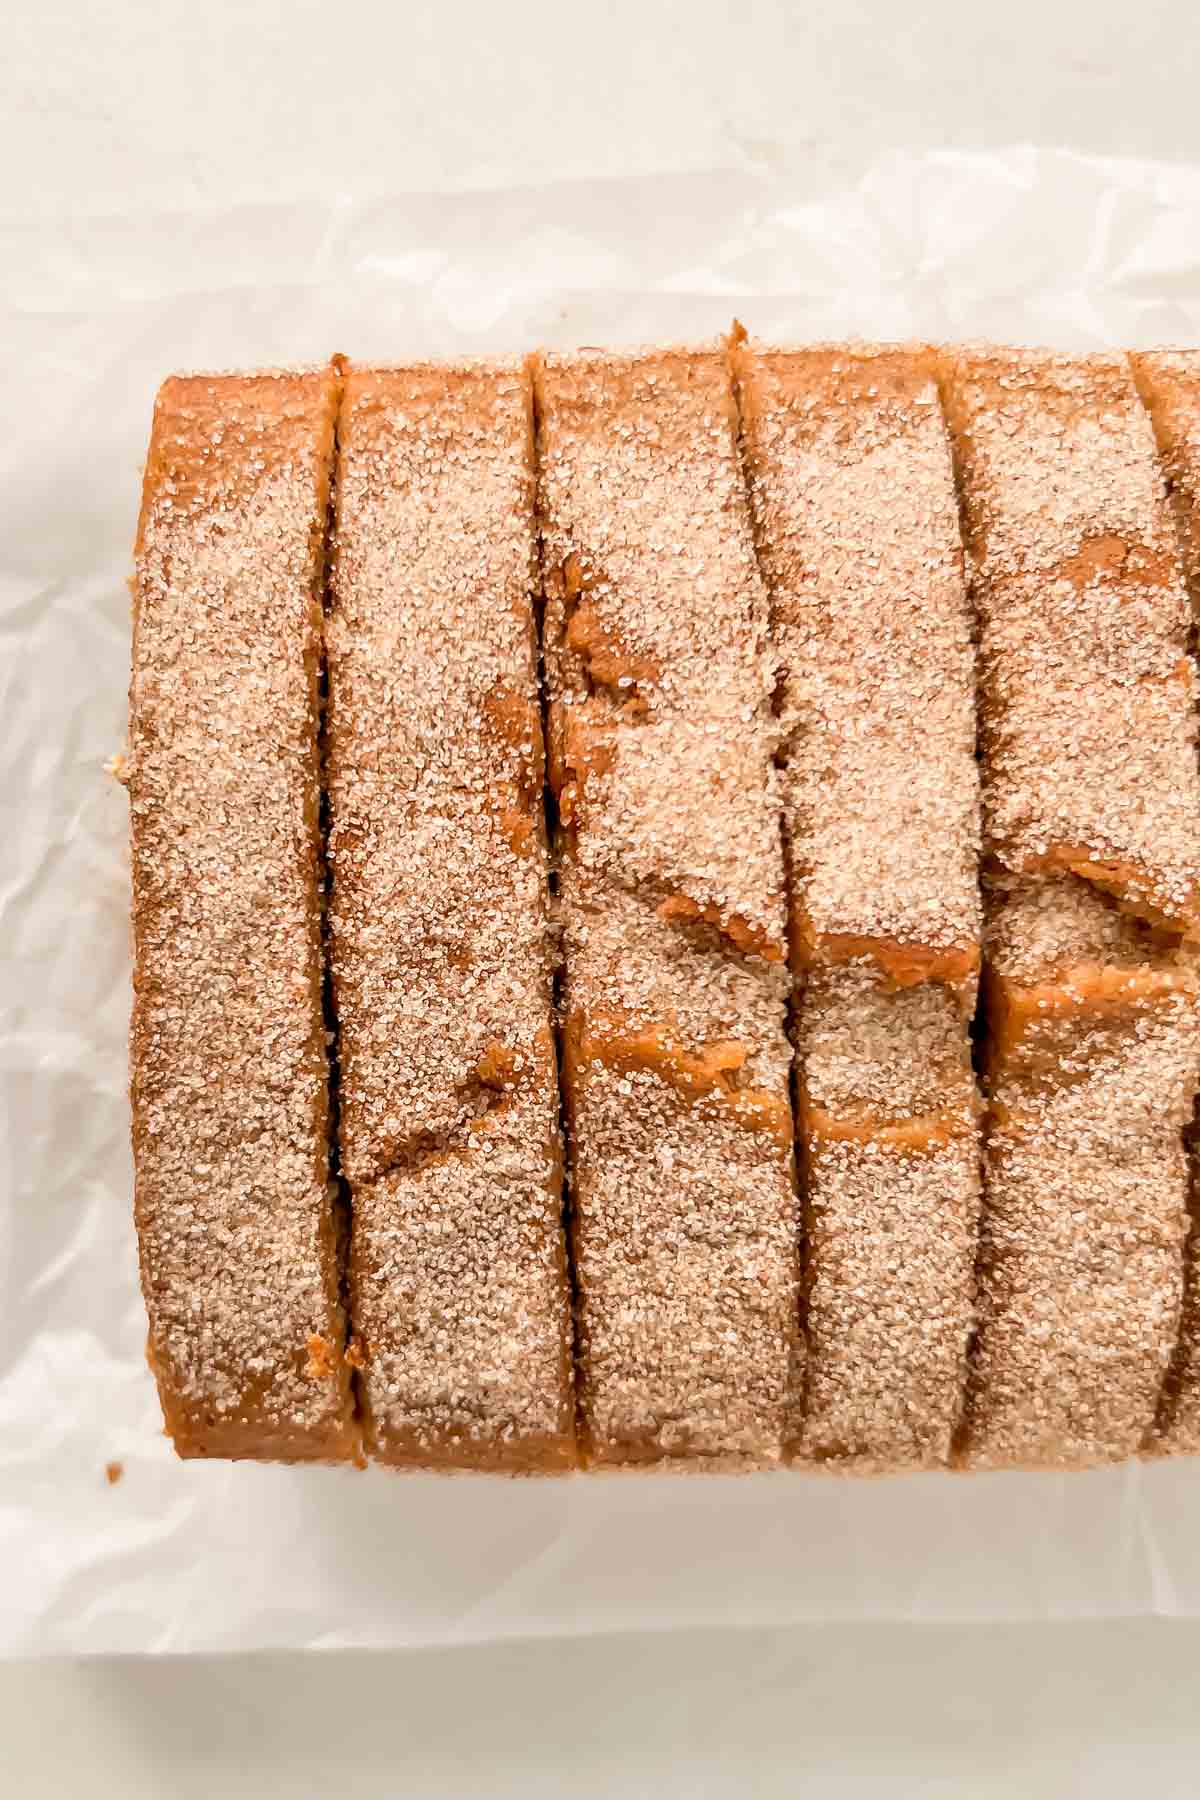 sliced cinnamon donut bread dusted with cinnamon sugar on white parchment paper.